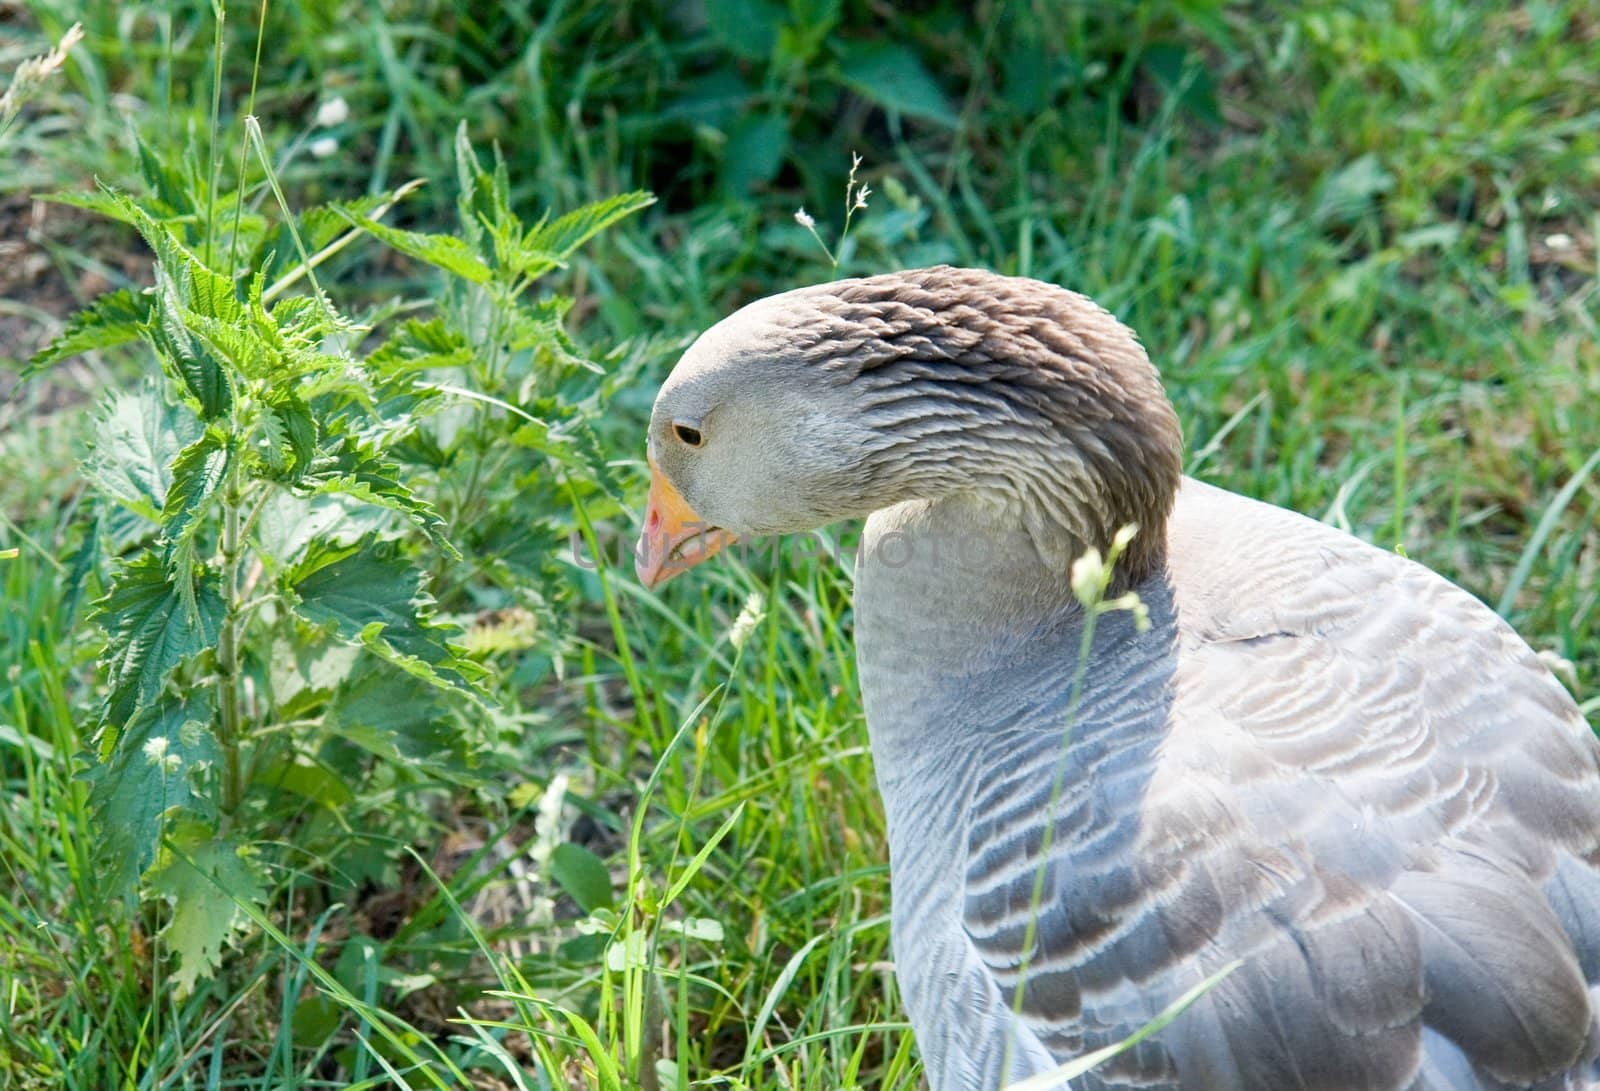 Fatty goose with green grass at background